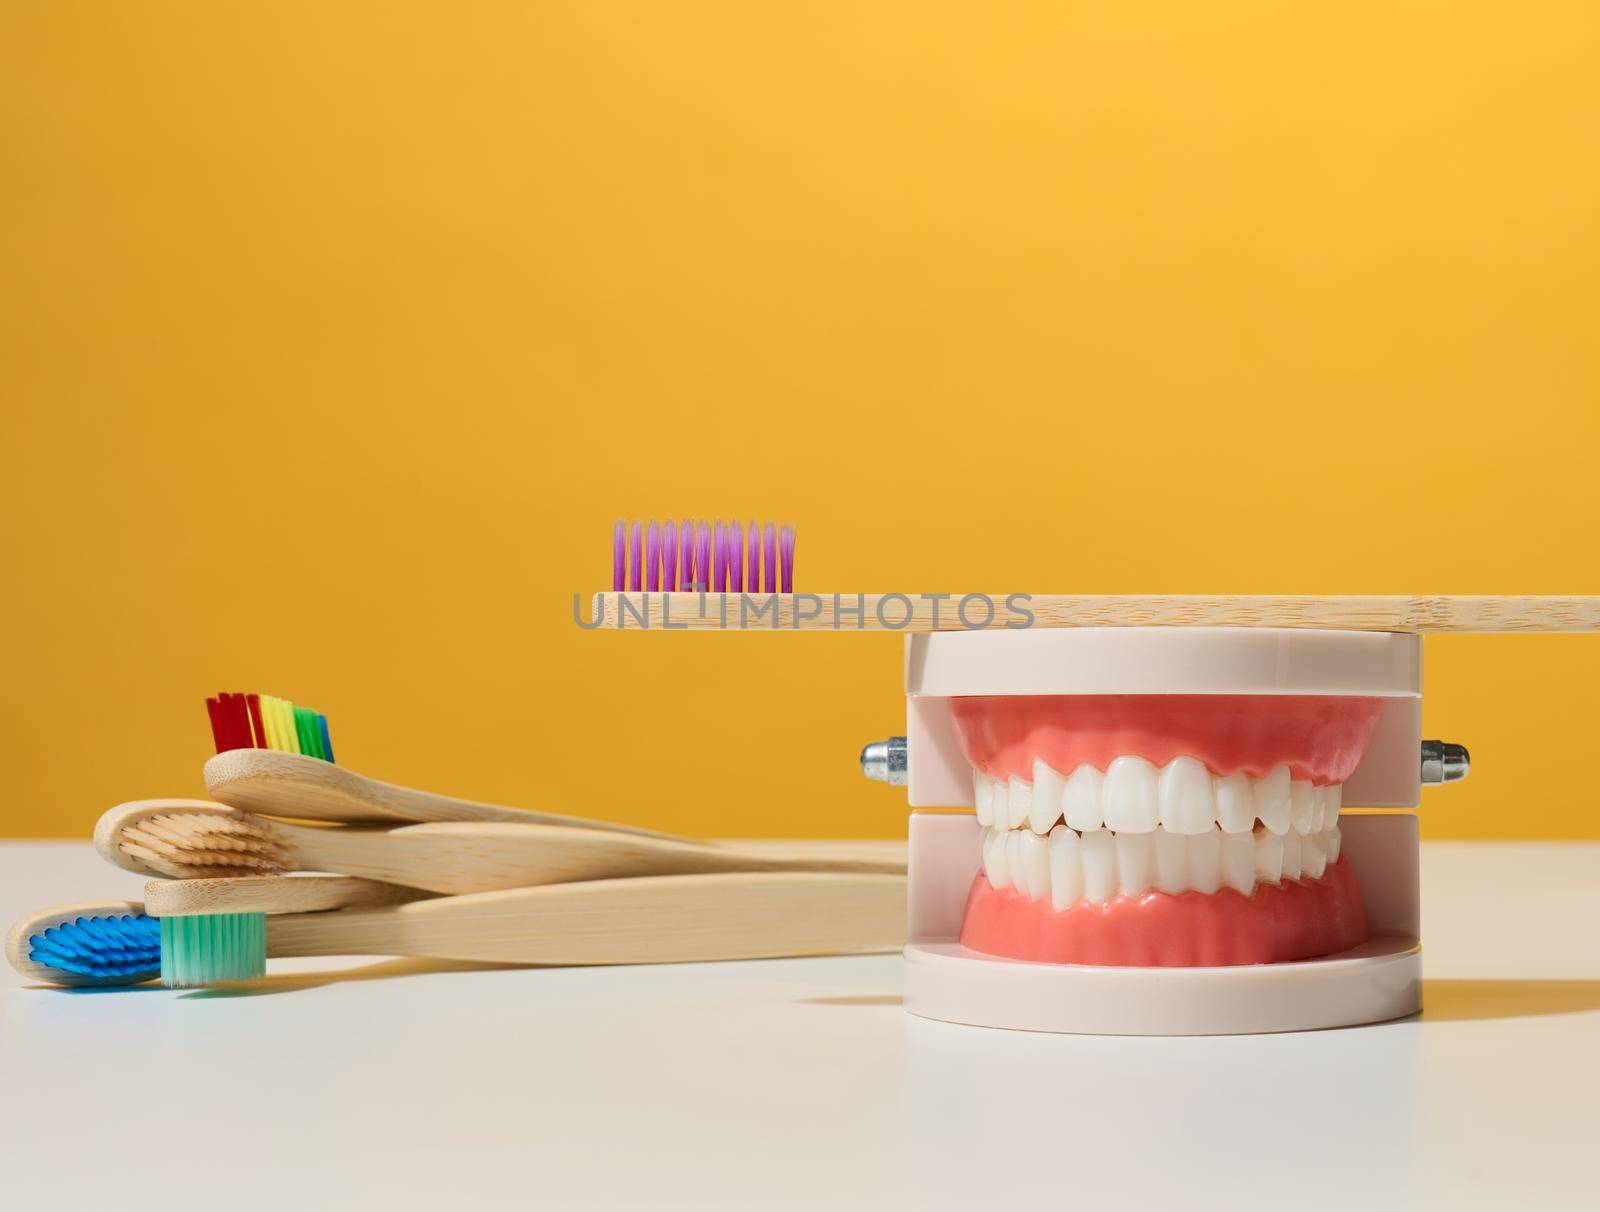 plastic model of a human jaw with white teeth and wooden toothbrush on a yellow background, oral hygiene